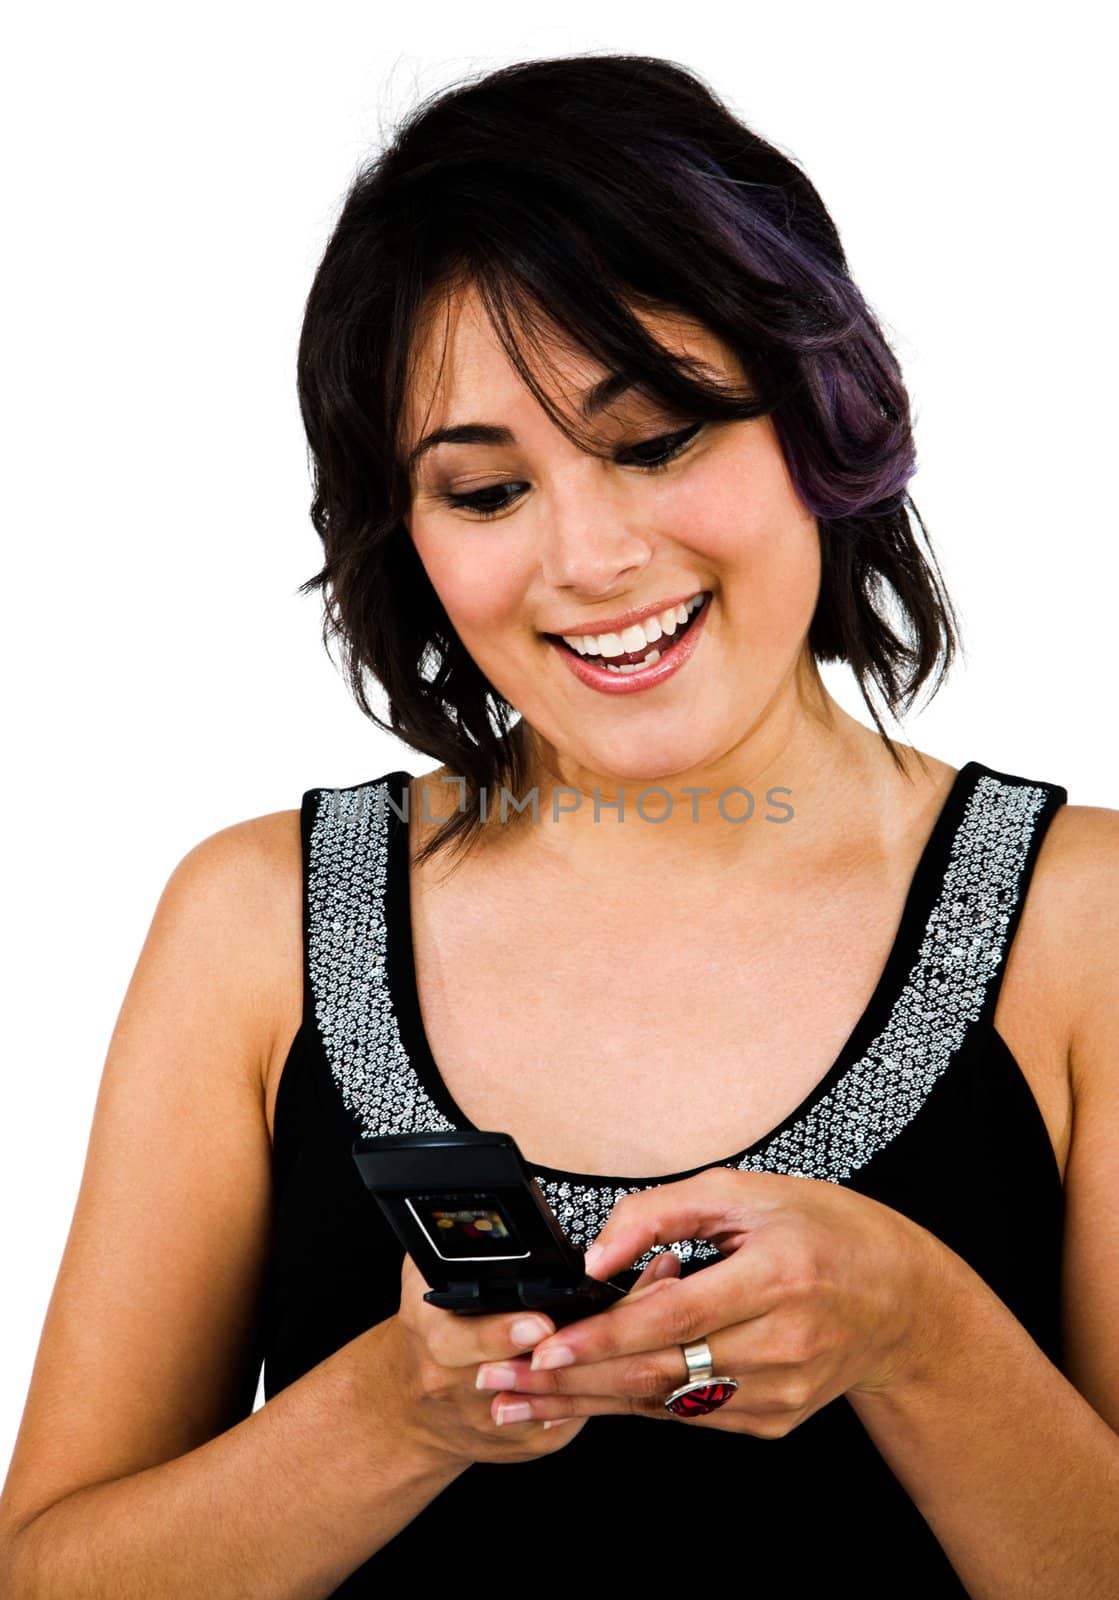 Close-up of a woman text messaging  by jackmicro